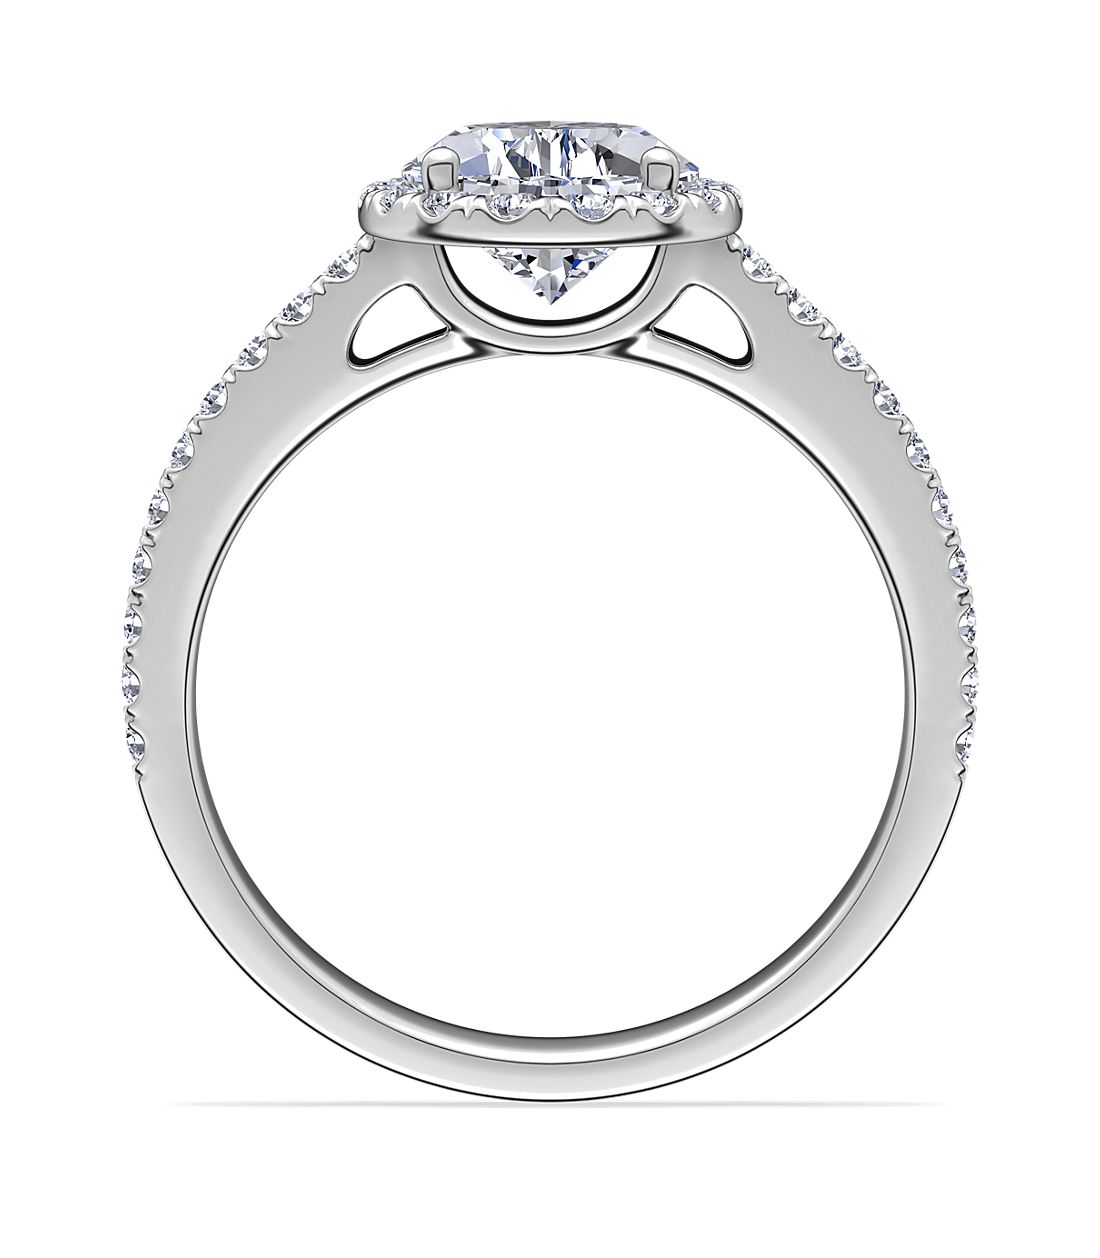 Pear Shaped Halo Diamond Engagement Ring in 14k White Gold